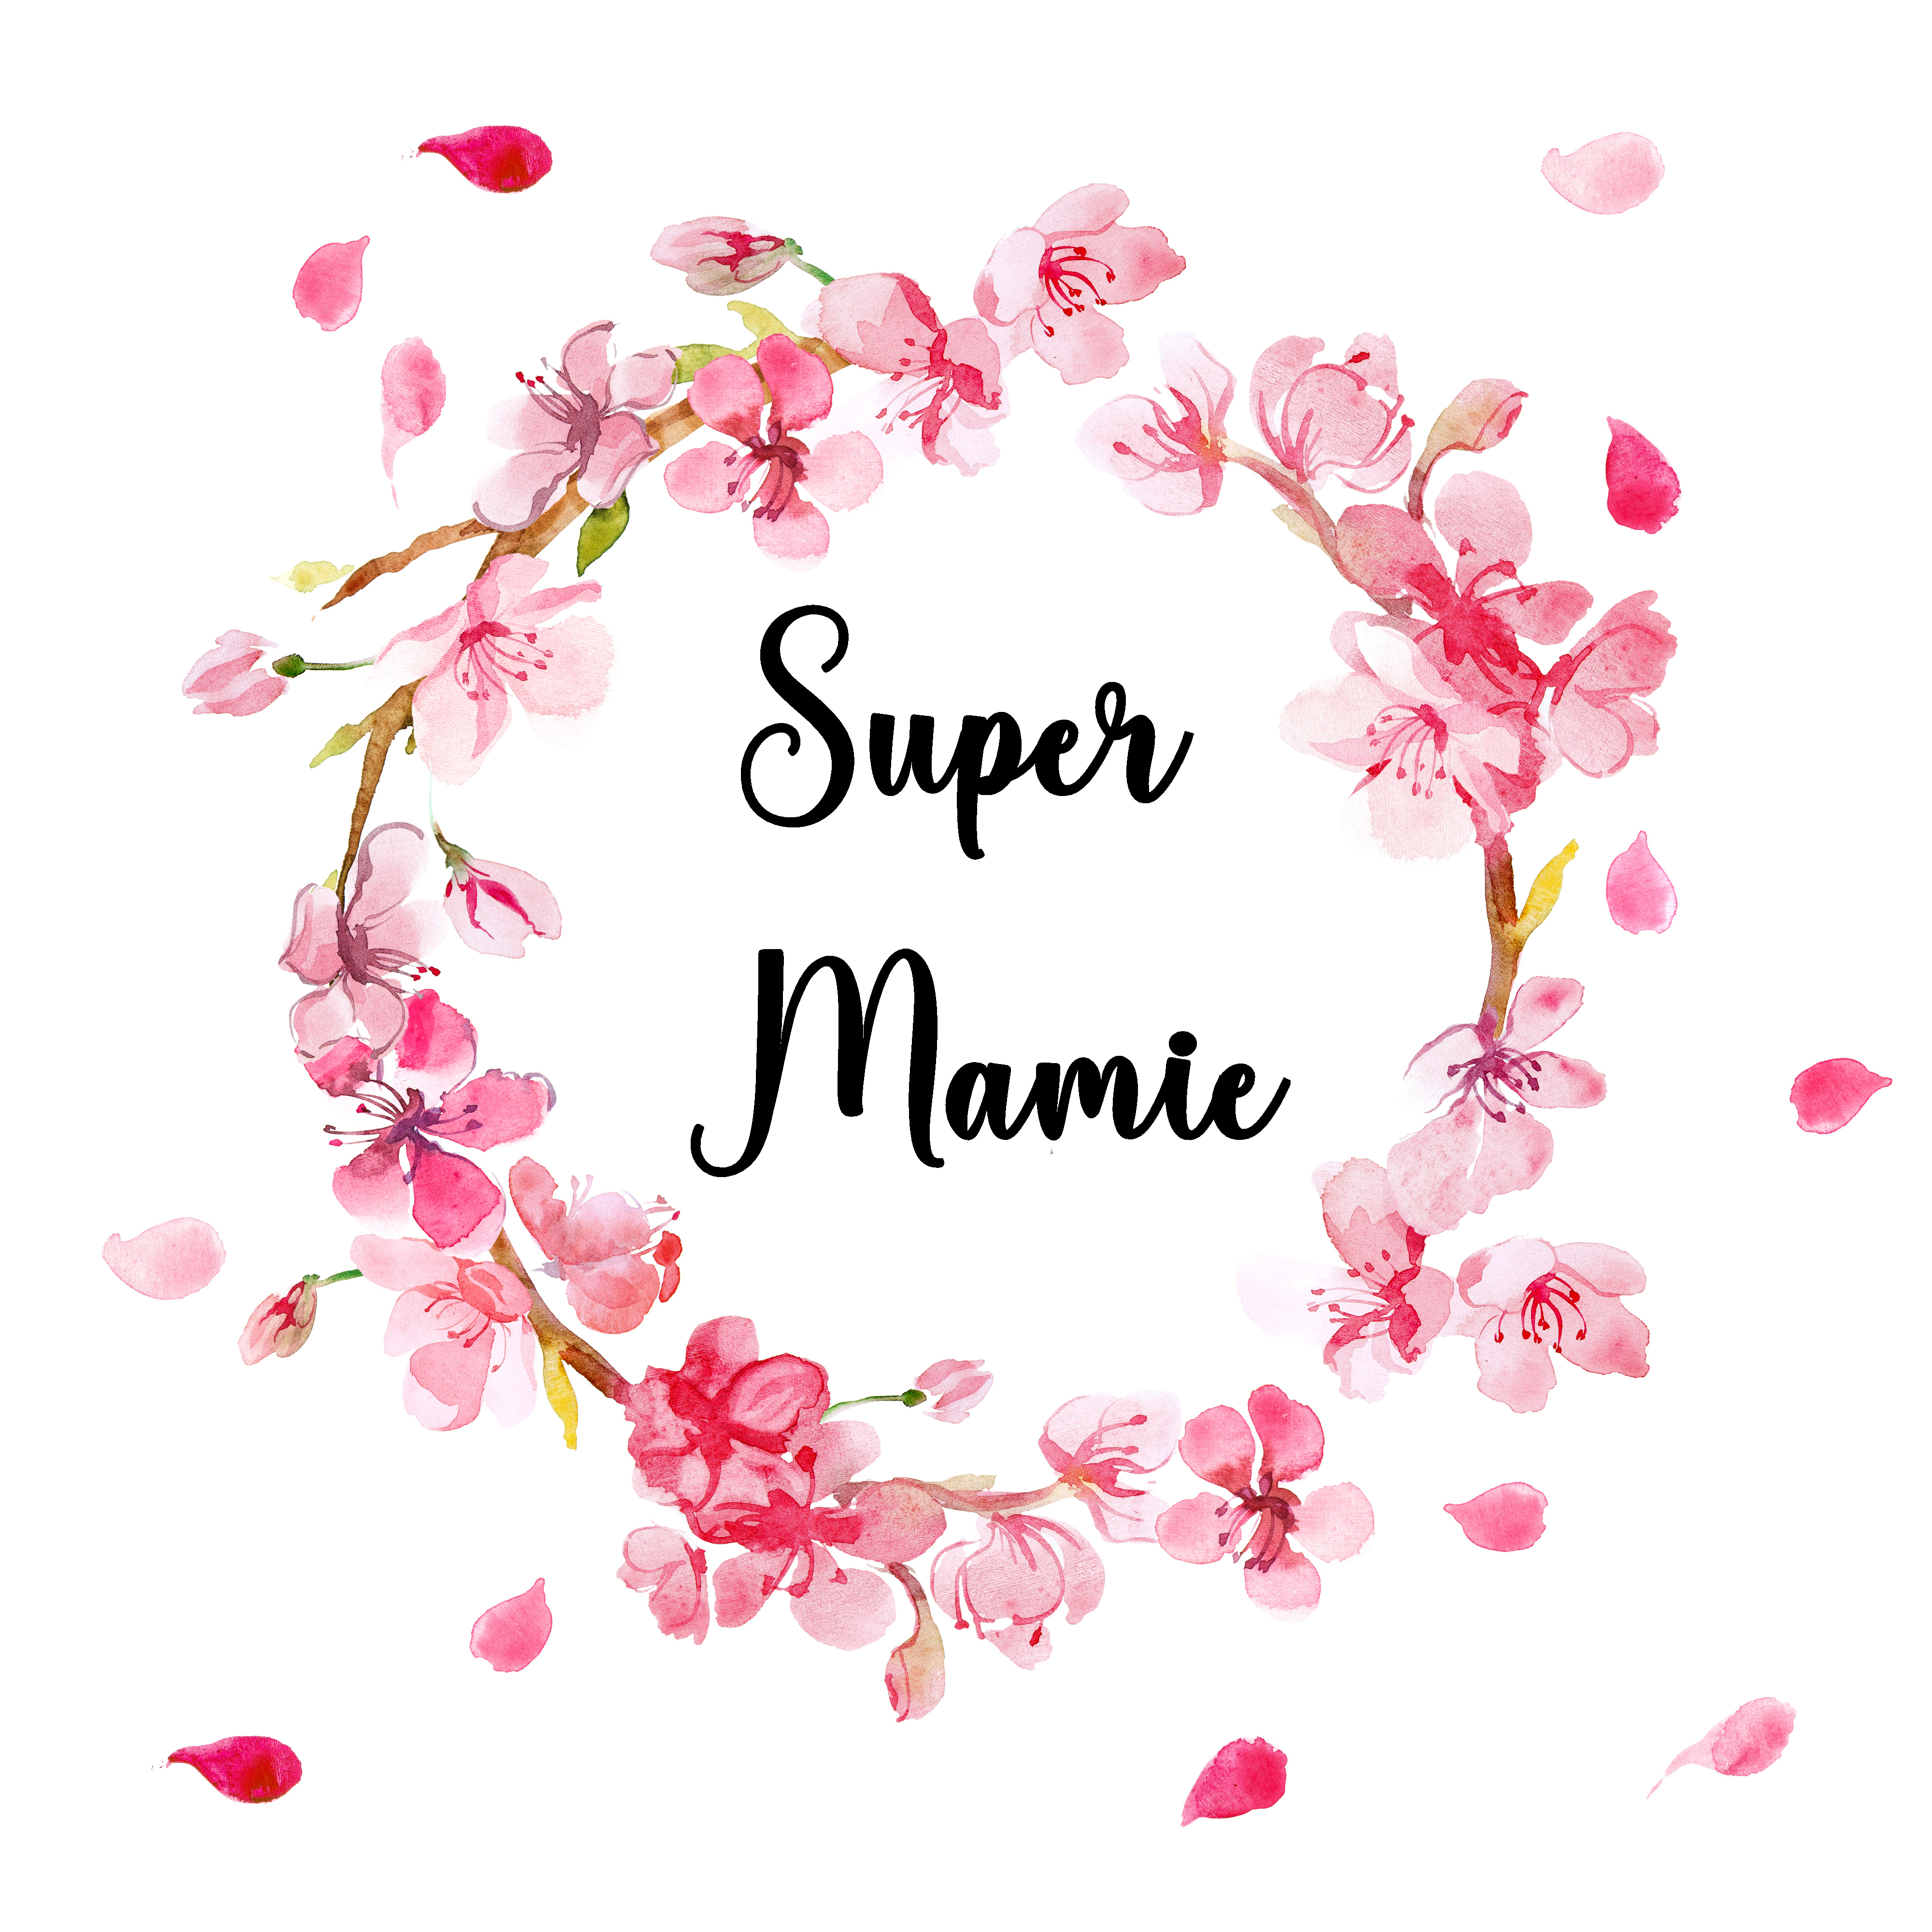 Sac Super Mamie – Cool and the bag